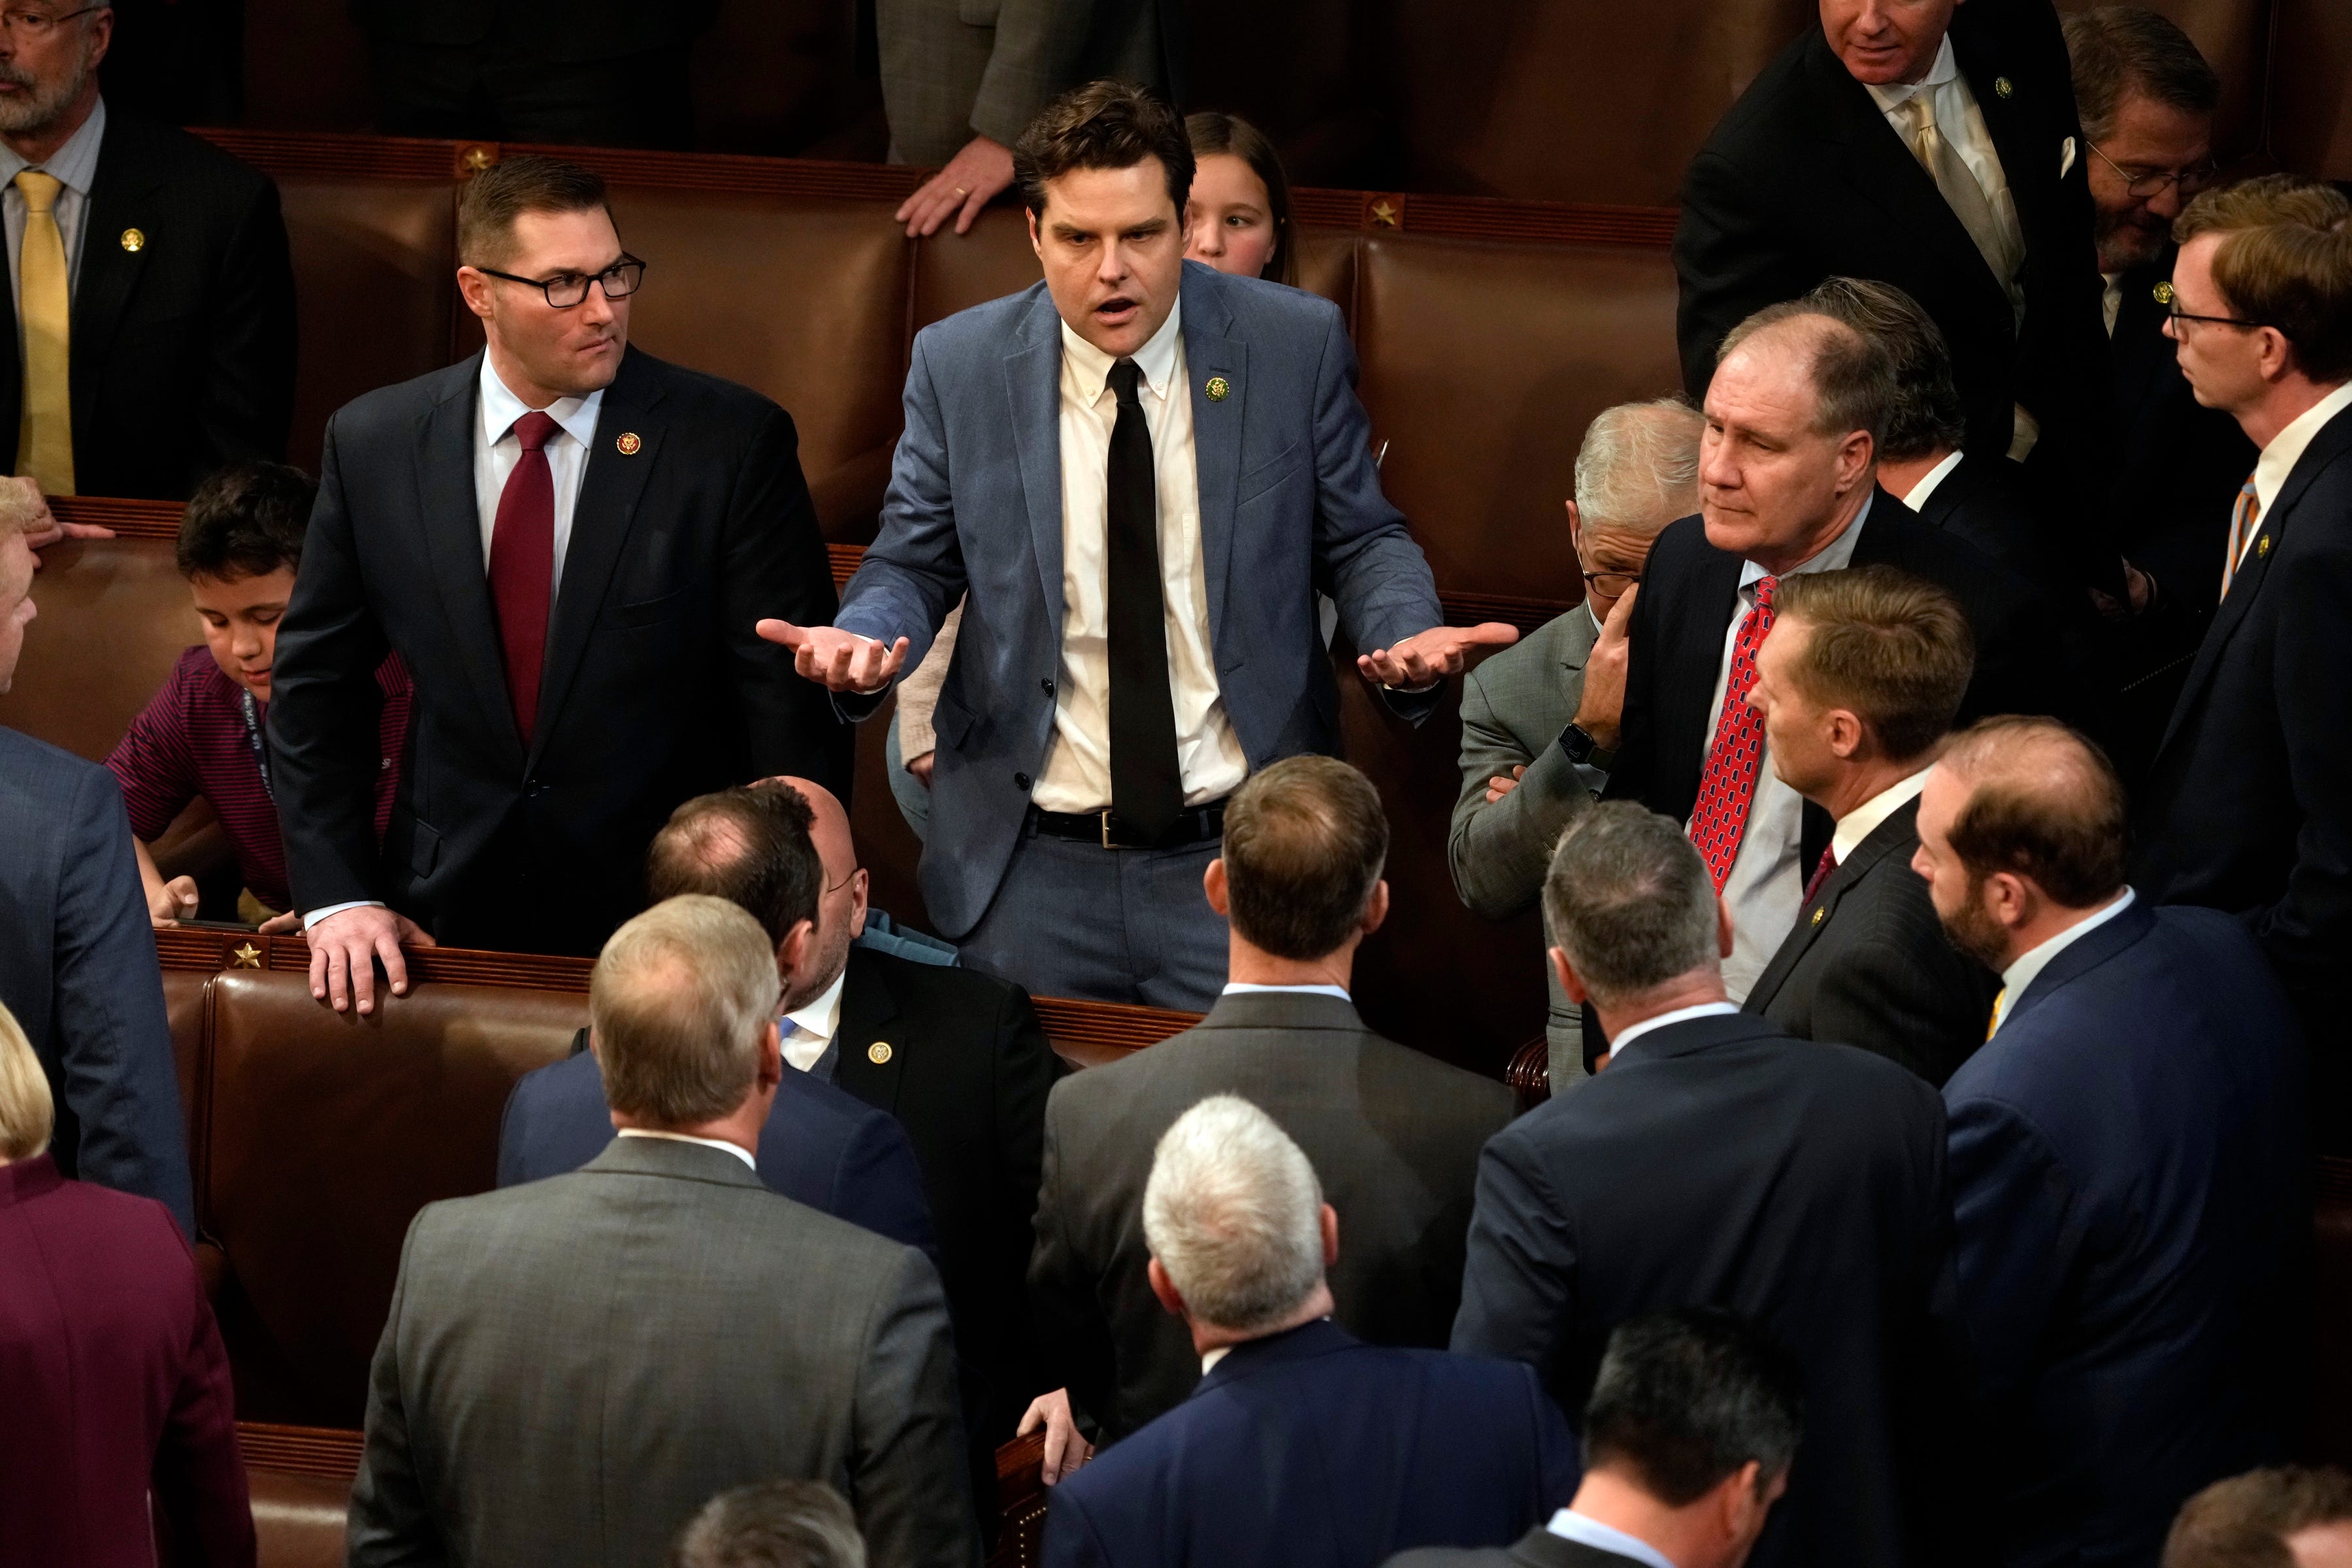 Rep Matt Gaetz, R-Fla., talks with colleagues in the House chamber. The House of Representatives reconvened trying to elect a Speaker of the House as the 118th session of Congress begins.